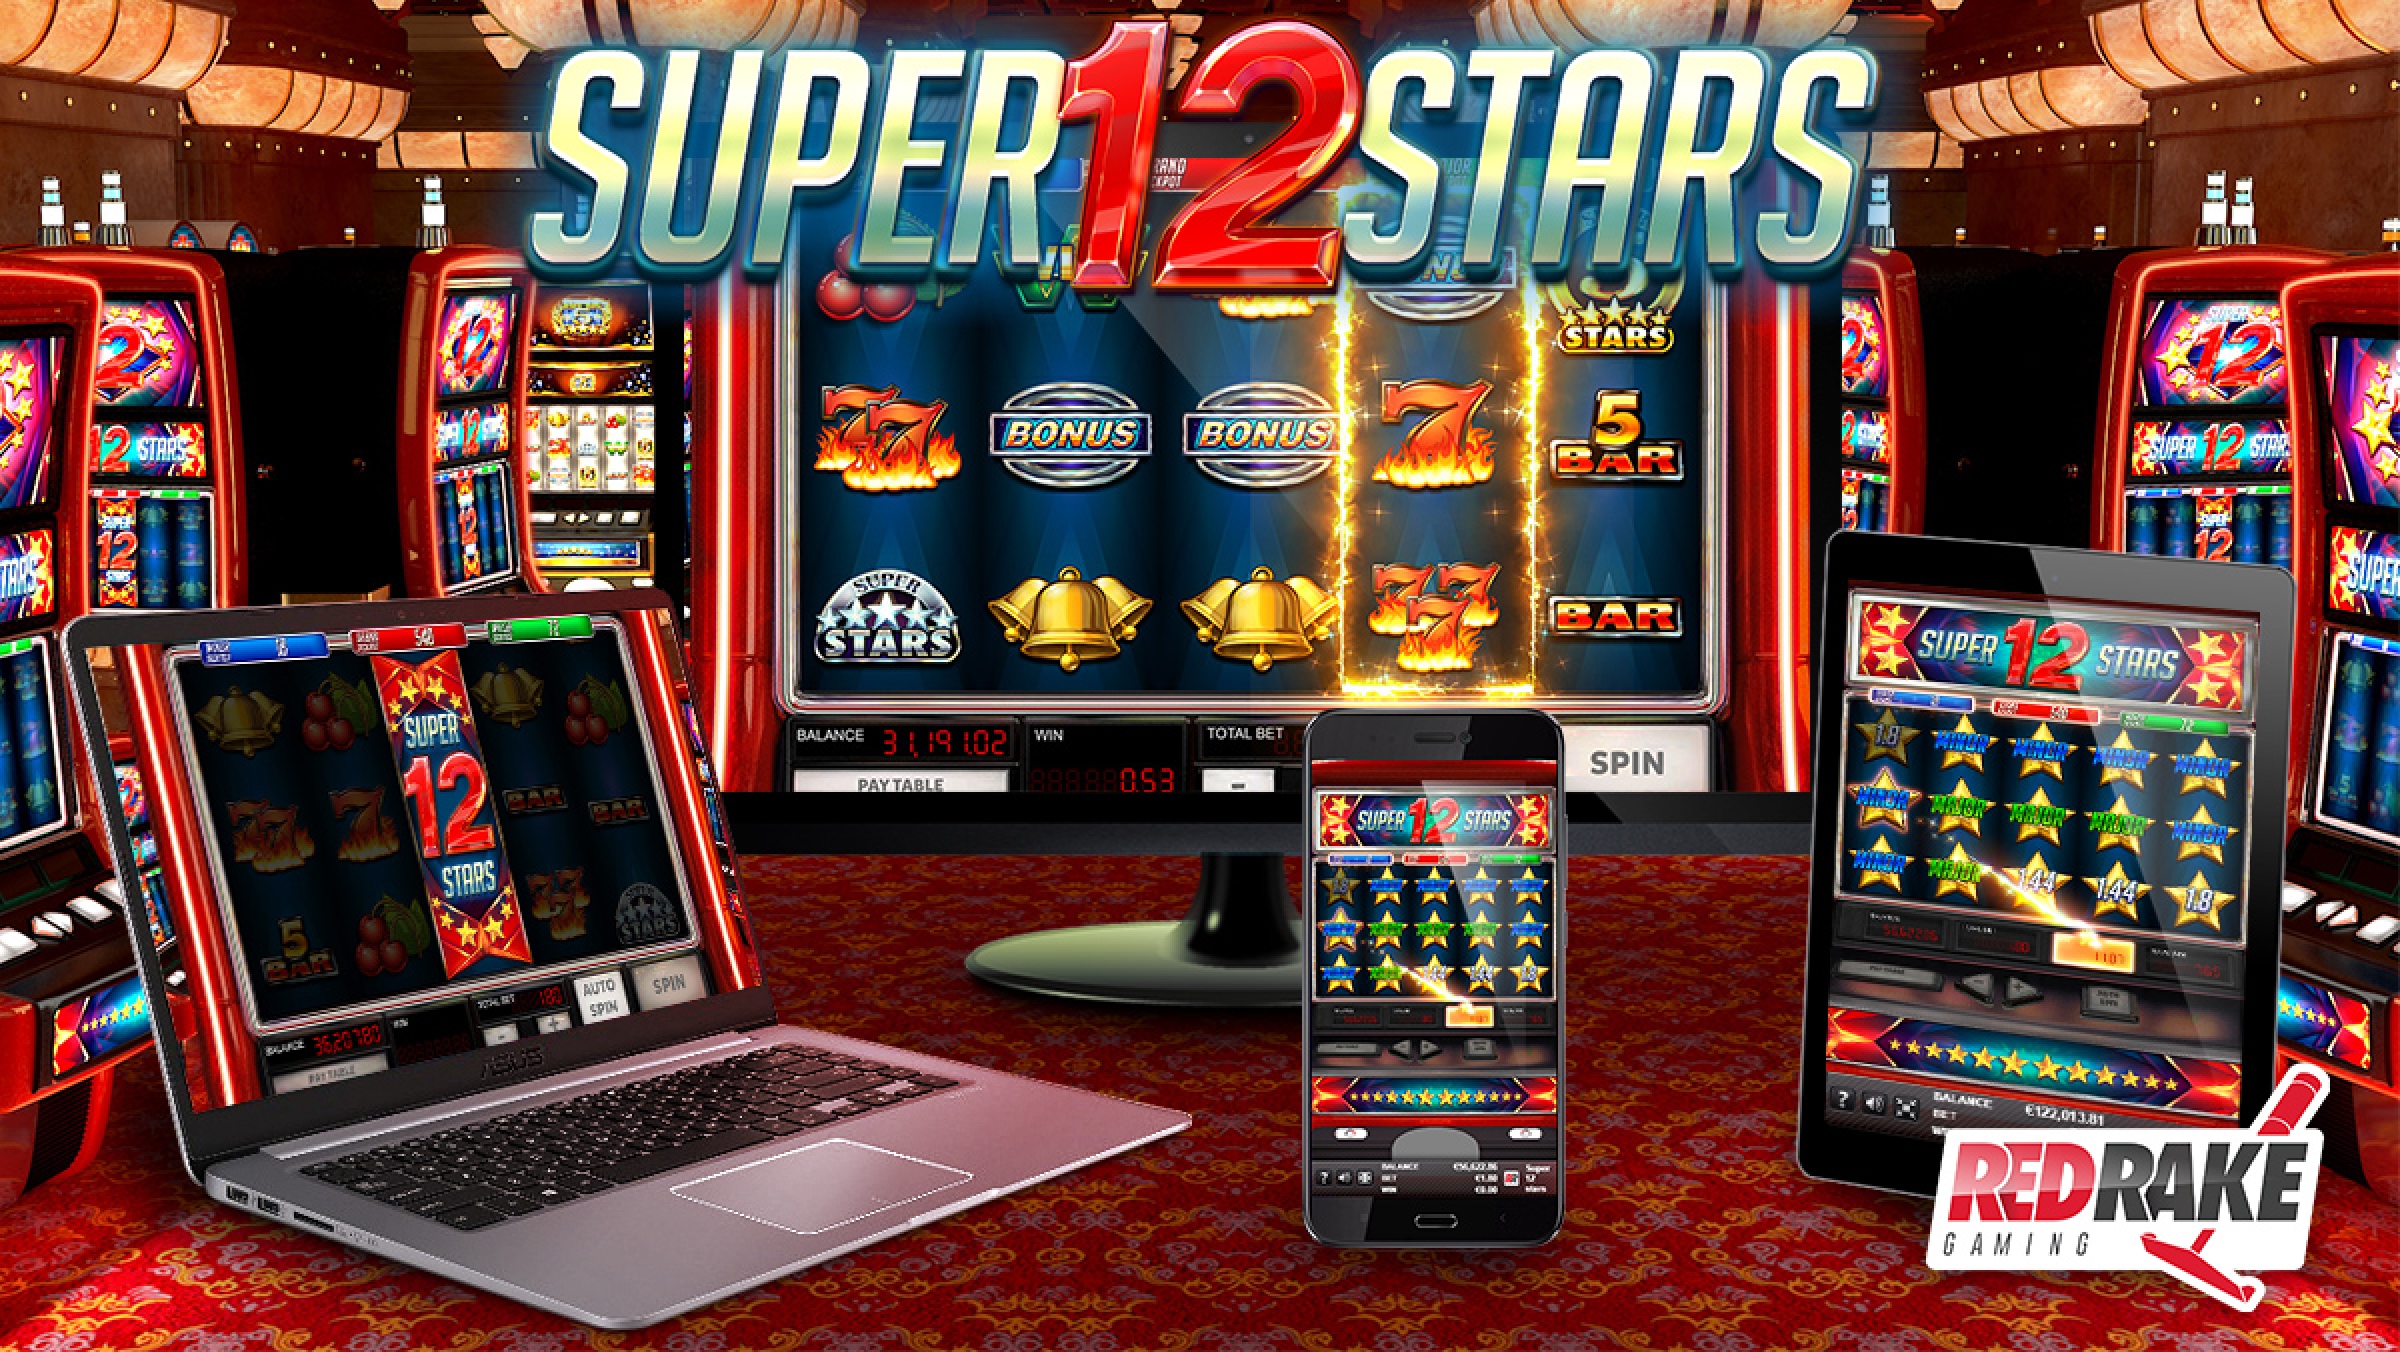 The Super 12 Stars Online Slot Demo Game by Red Rake Gaming